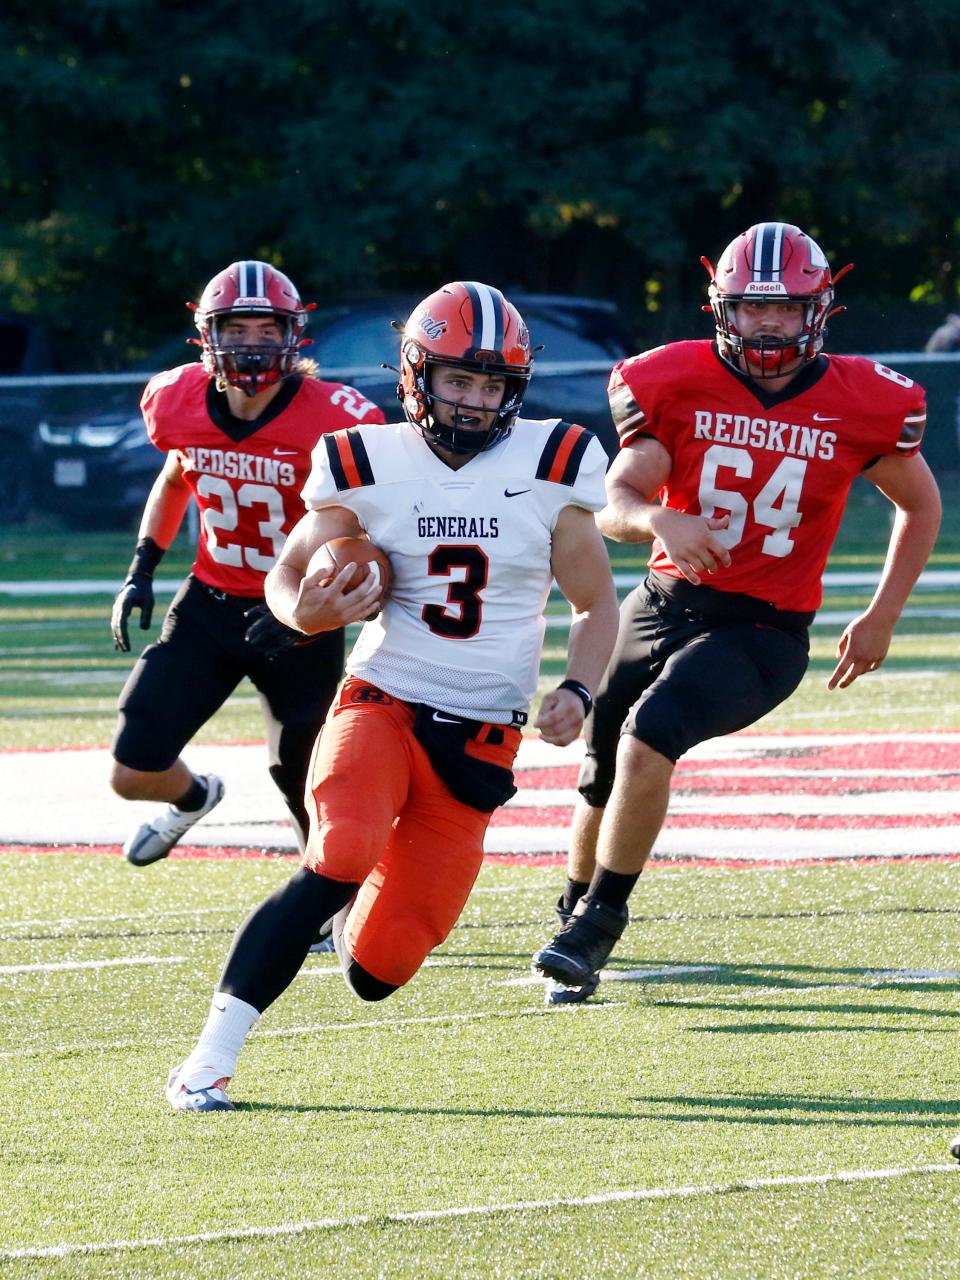 Ridgewood quarterback Carter Fry runs with the ball against Coshocton on Friday night at Stewart Field.